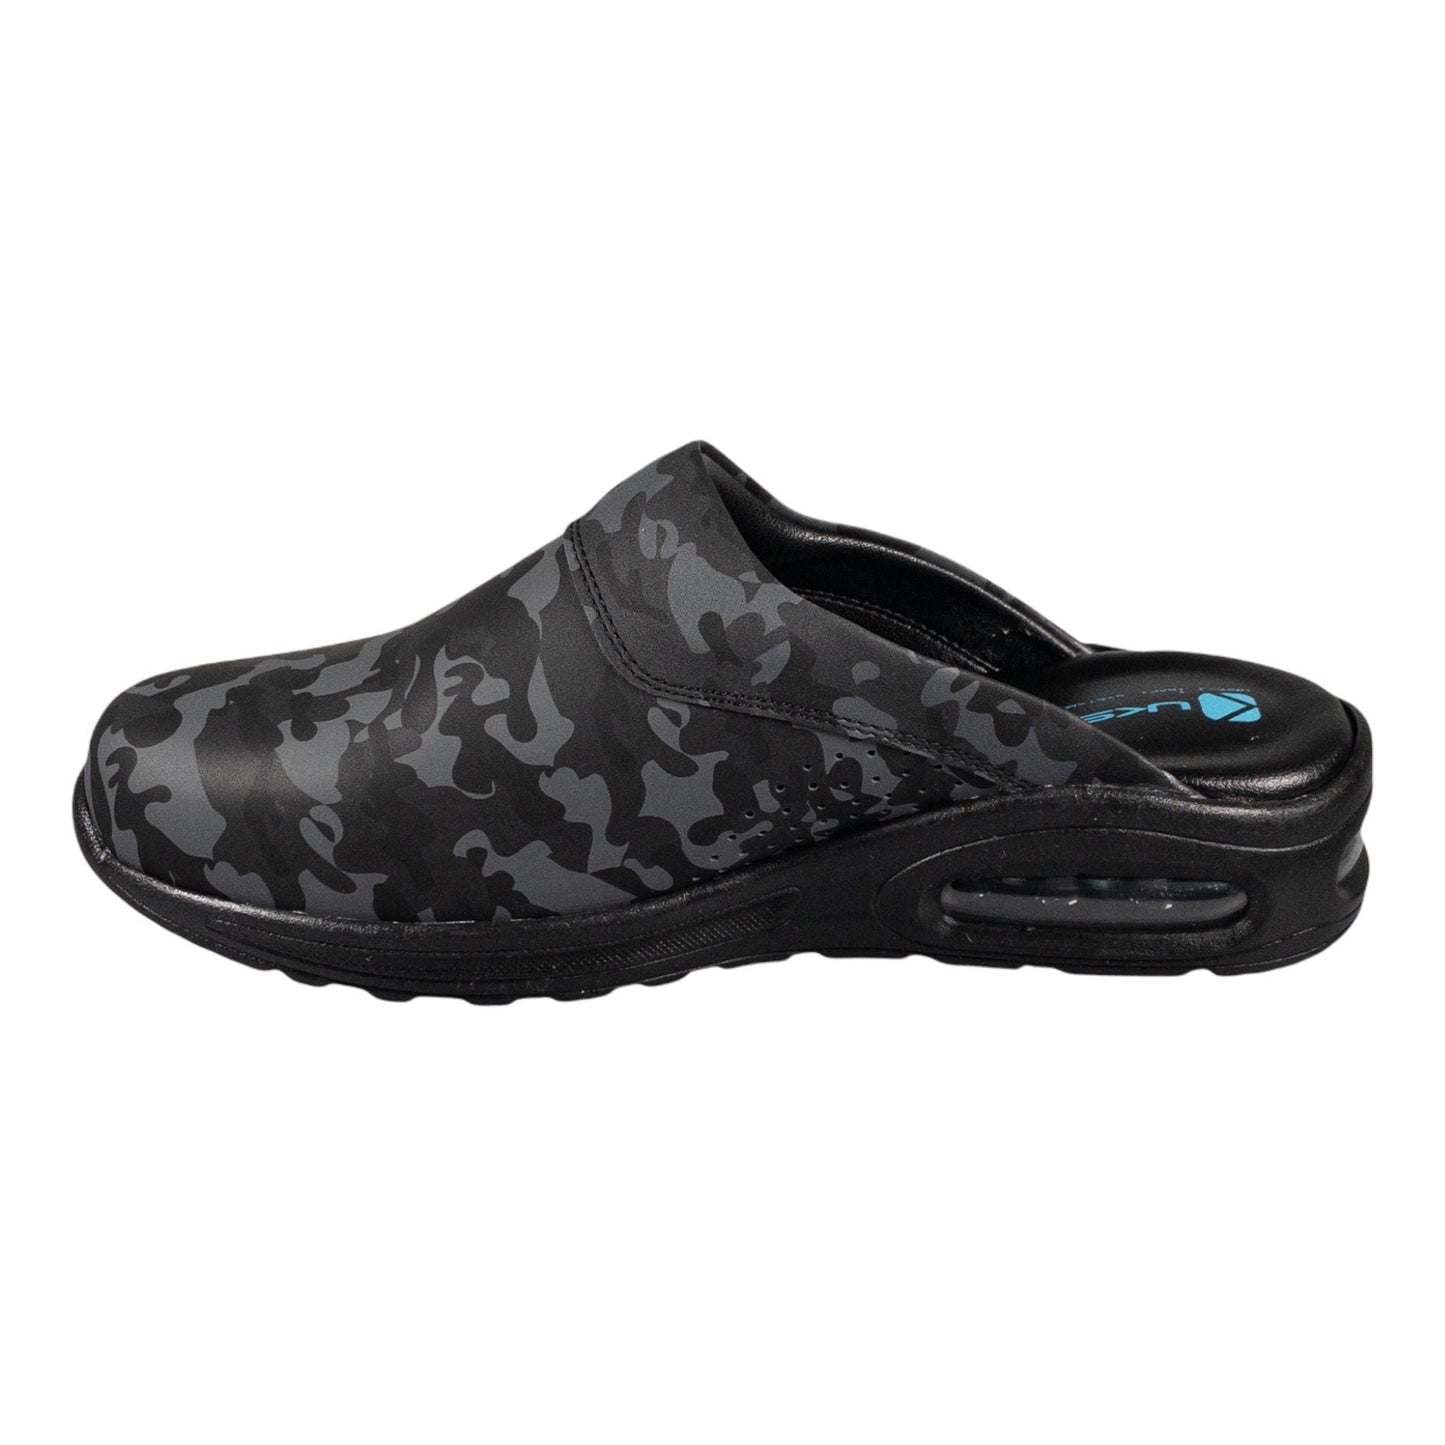 Camouflage Air Clogx Light Sole Leather Clogs Slippers